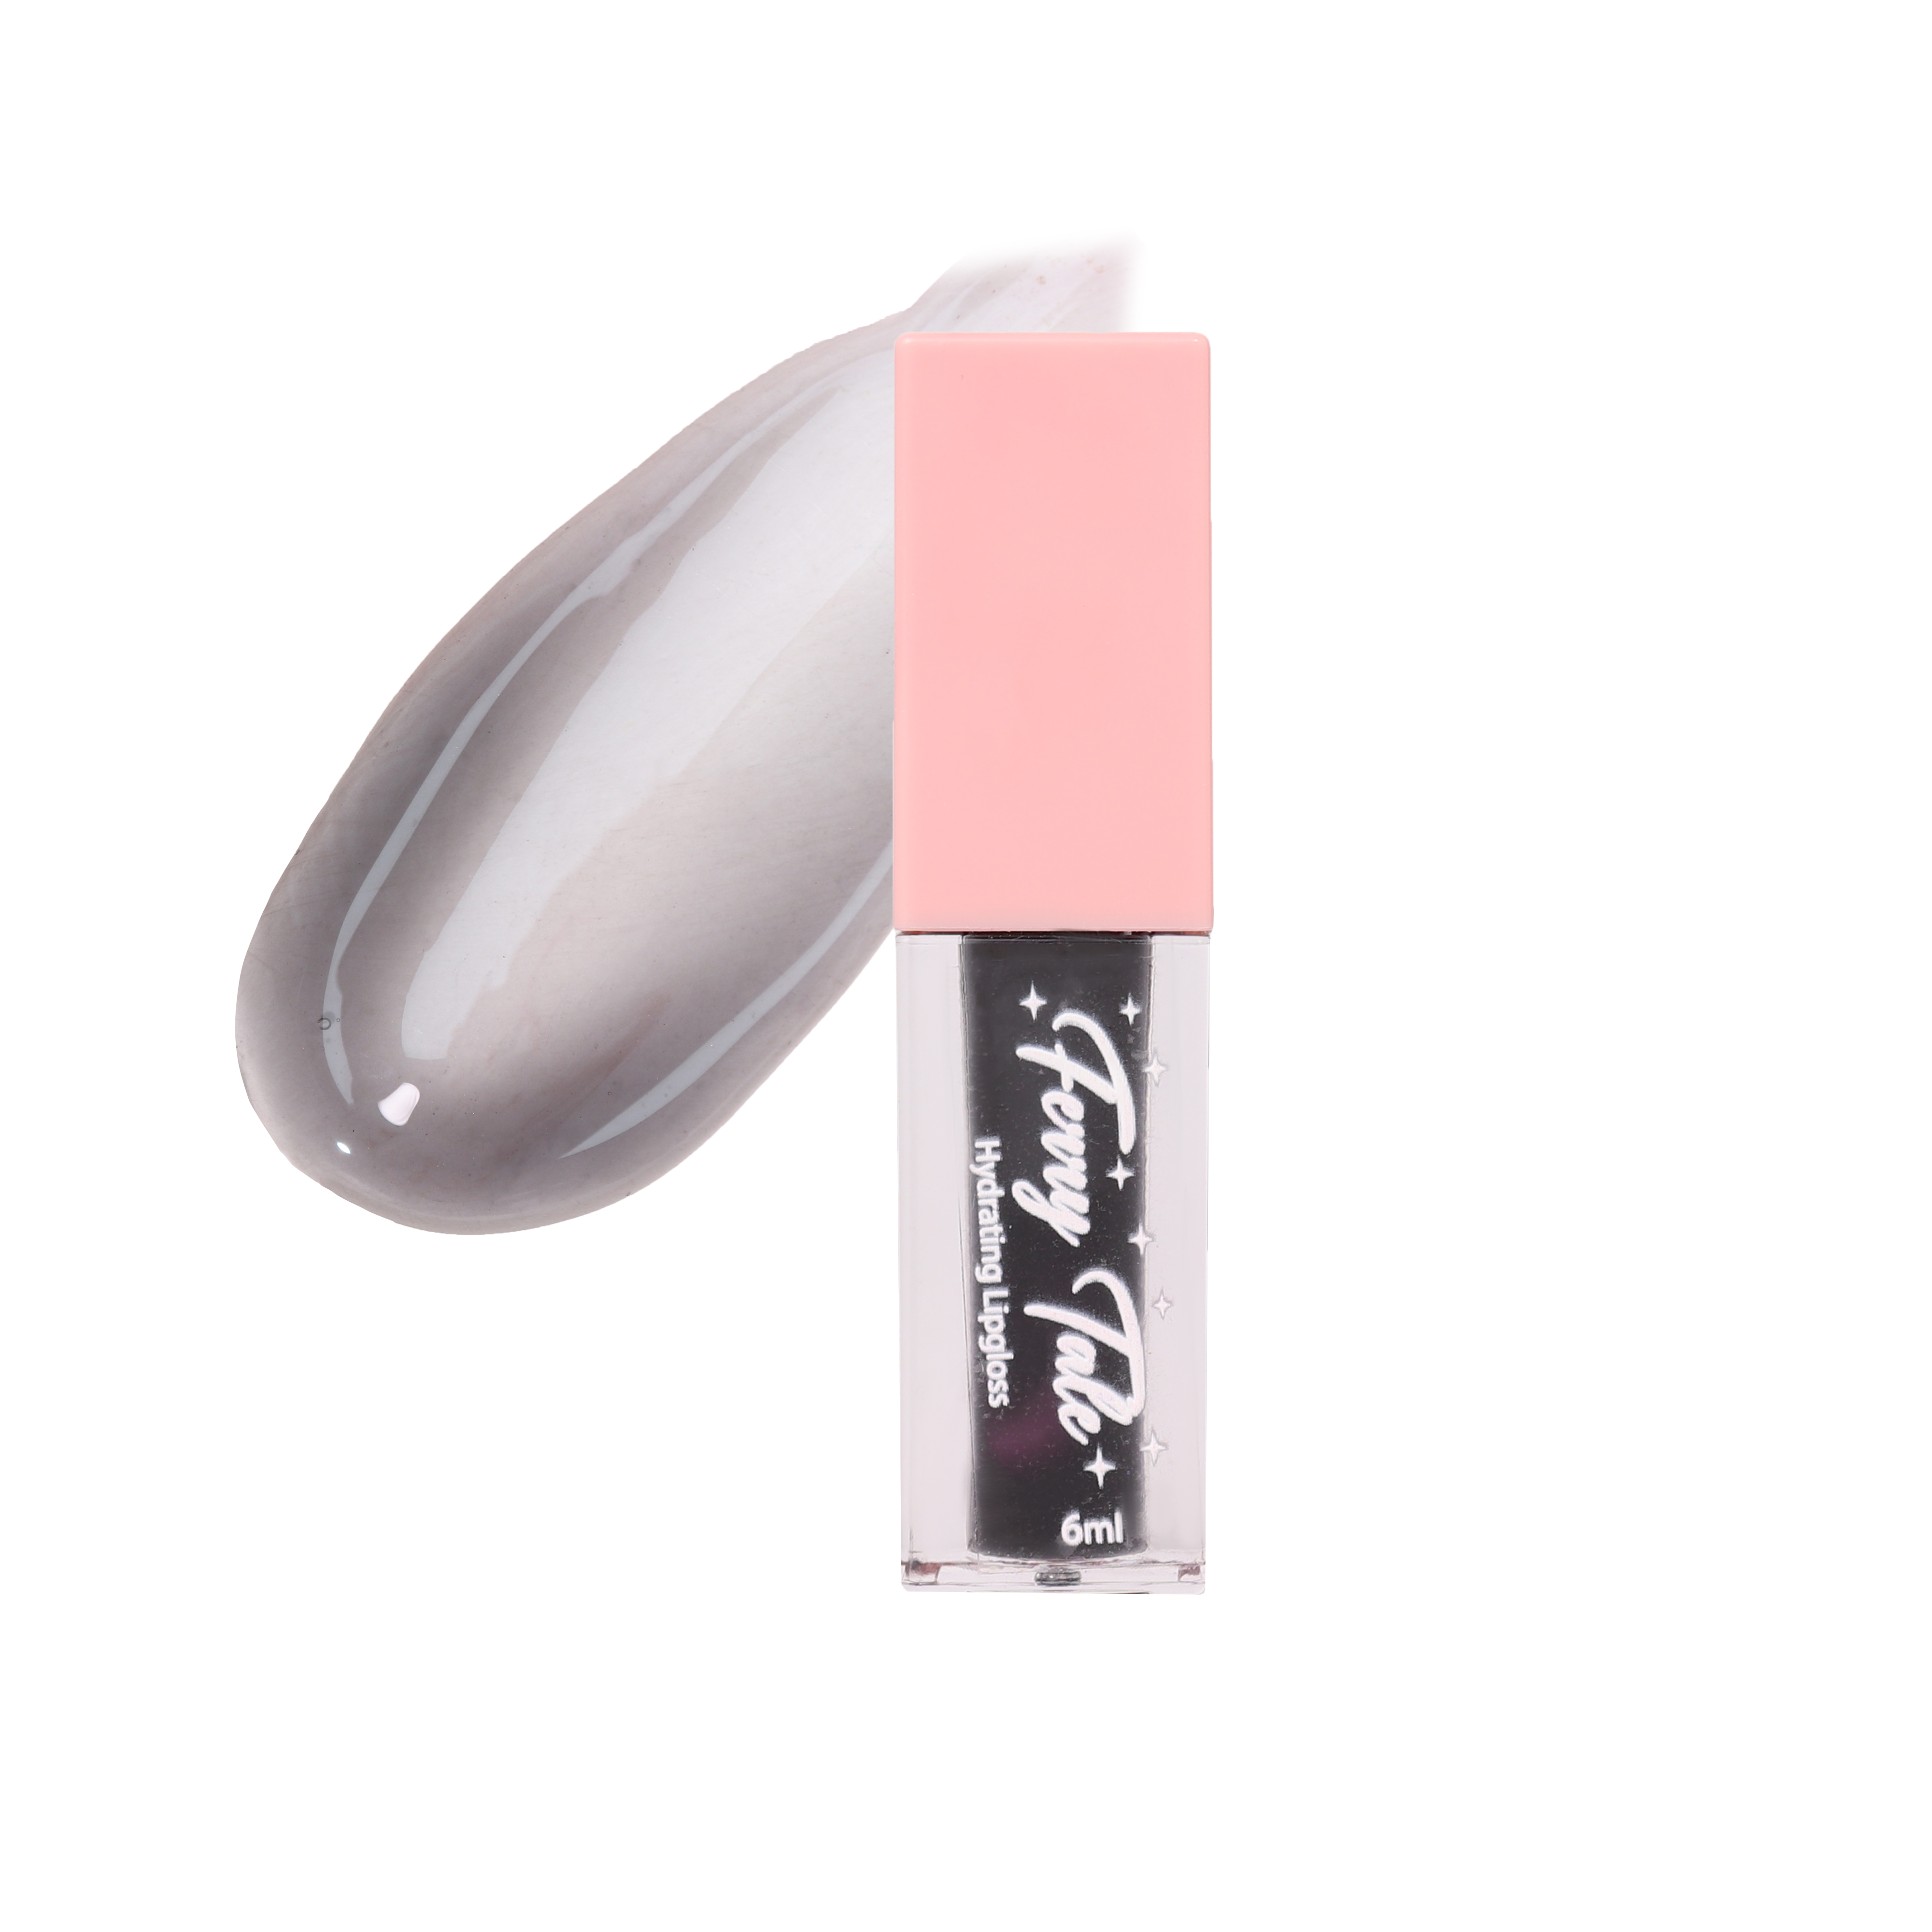 <p><strong><span style="color: rgb(168, 51, 87)">Black Magic (Color Changing Lip Gloss )</span></strong></p>